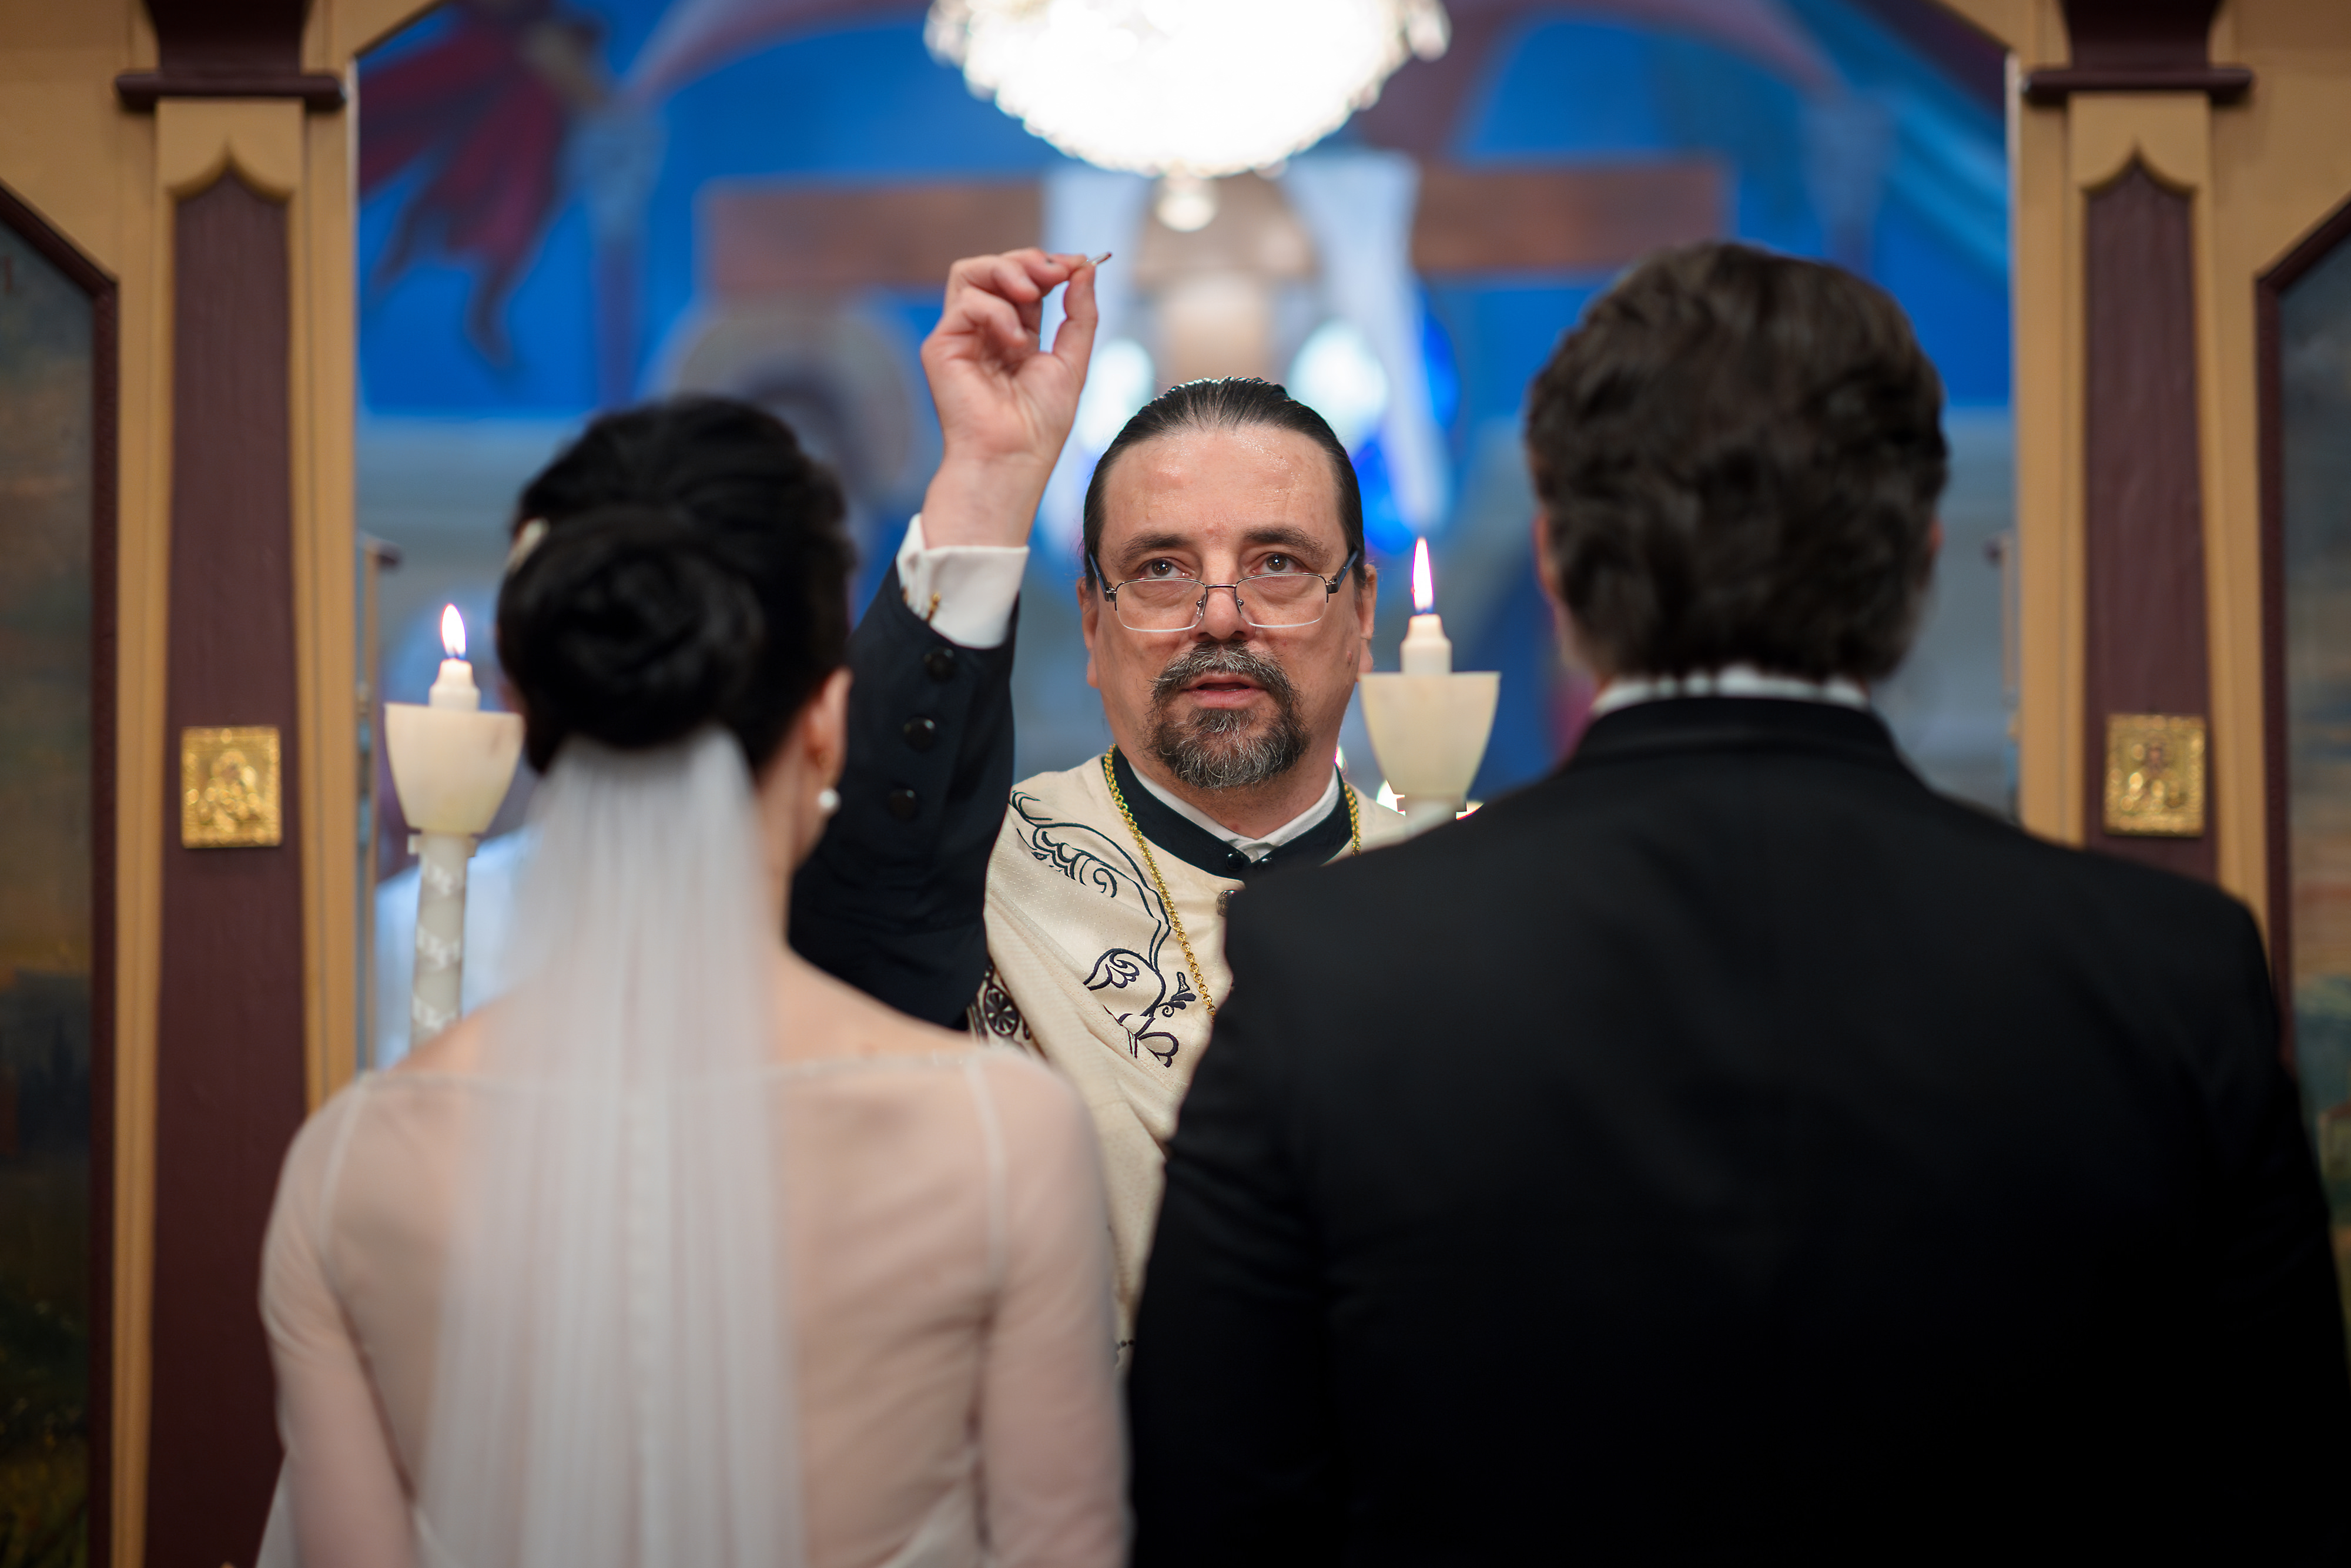 Serbian Orthodox Wedding at St. George church in East Chicago Indiana